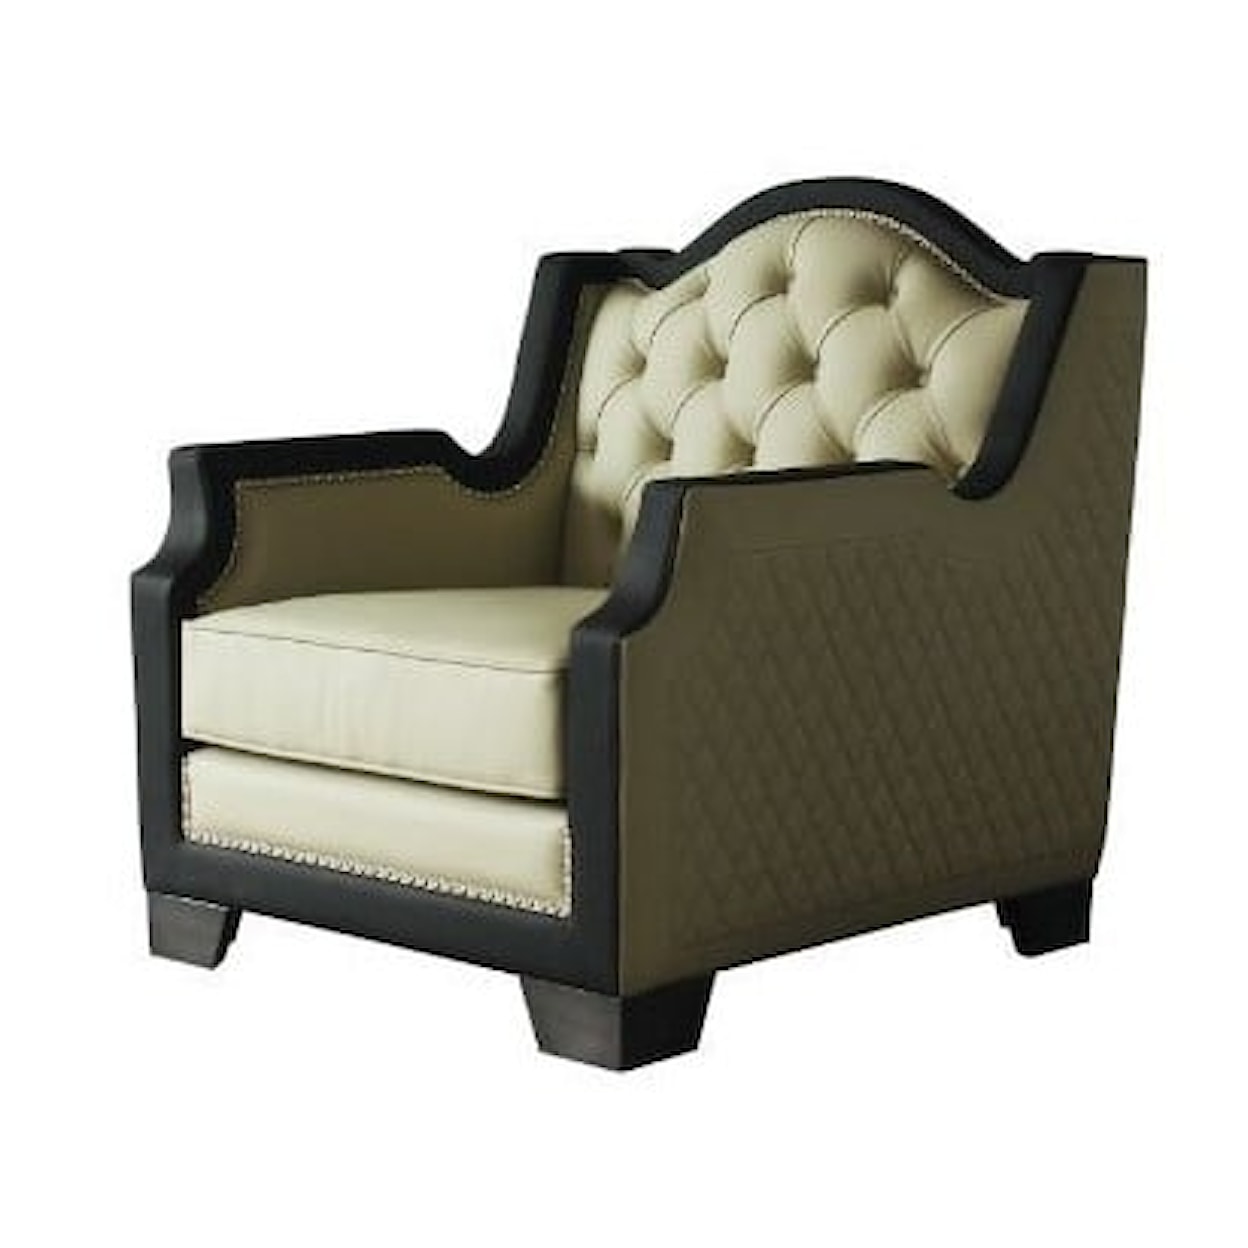 Acme Furniture House Beatrice Chair W/1 Pillow